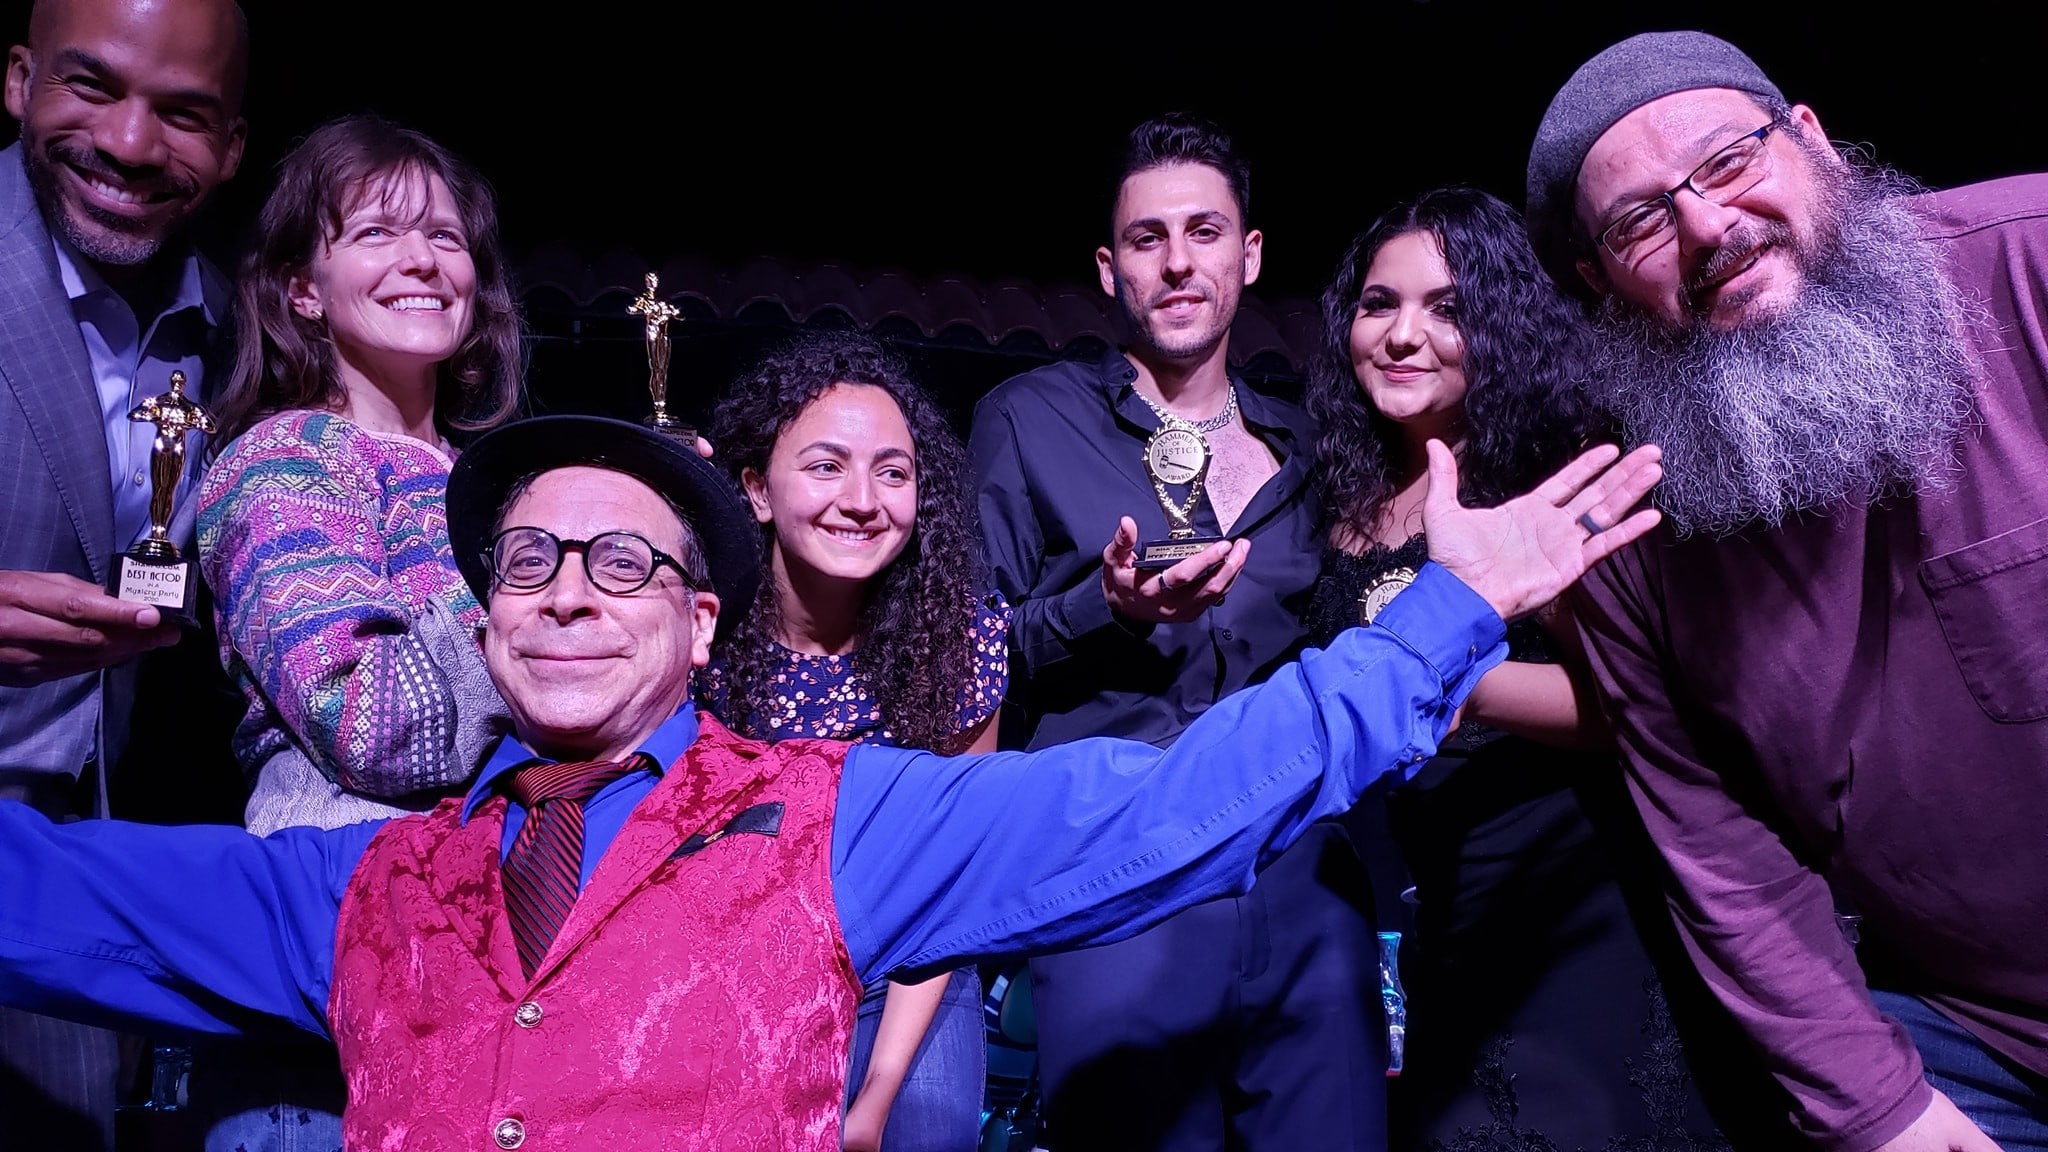 Sharpo and cast with audience members on stage at the El Cid, LA for Mystery and Magic Show.